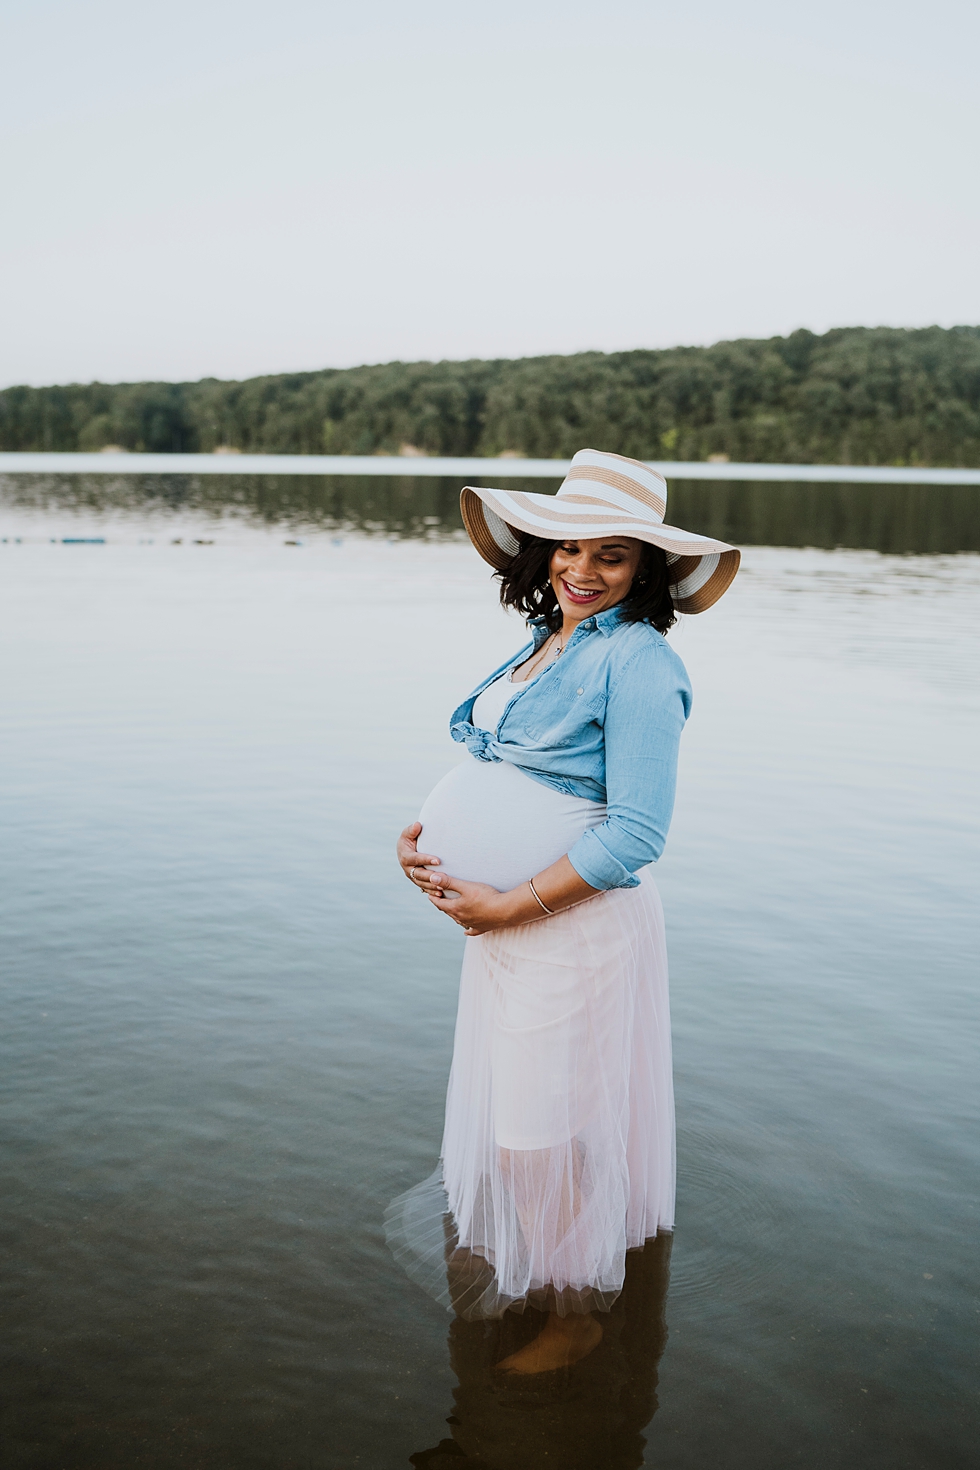  ACCESSORIES FOR MATERNITY PHOTO SHOOT WHITE HAT WITH BLACK RIM SHEER DRESS WITH JEAN COVER UP MATERNITY PHOTOGRAPHER WATER PHOTO SHOOT #photographer #maternityphotos #pregnancy #babybump #maternityphotoshoot #cincinnatiphotographer #louisvillephotog